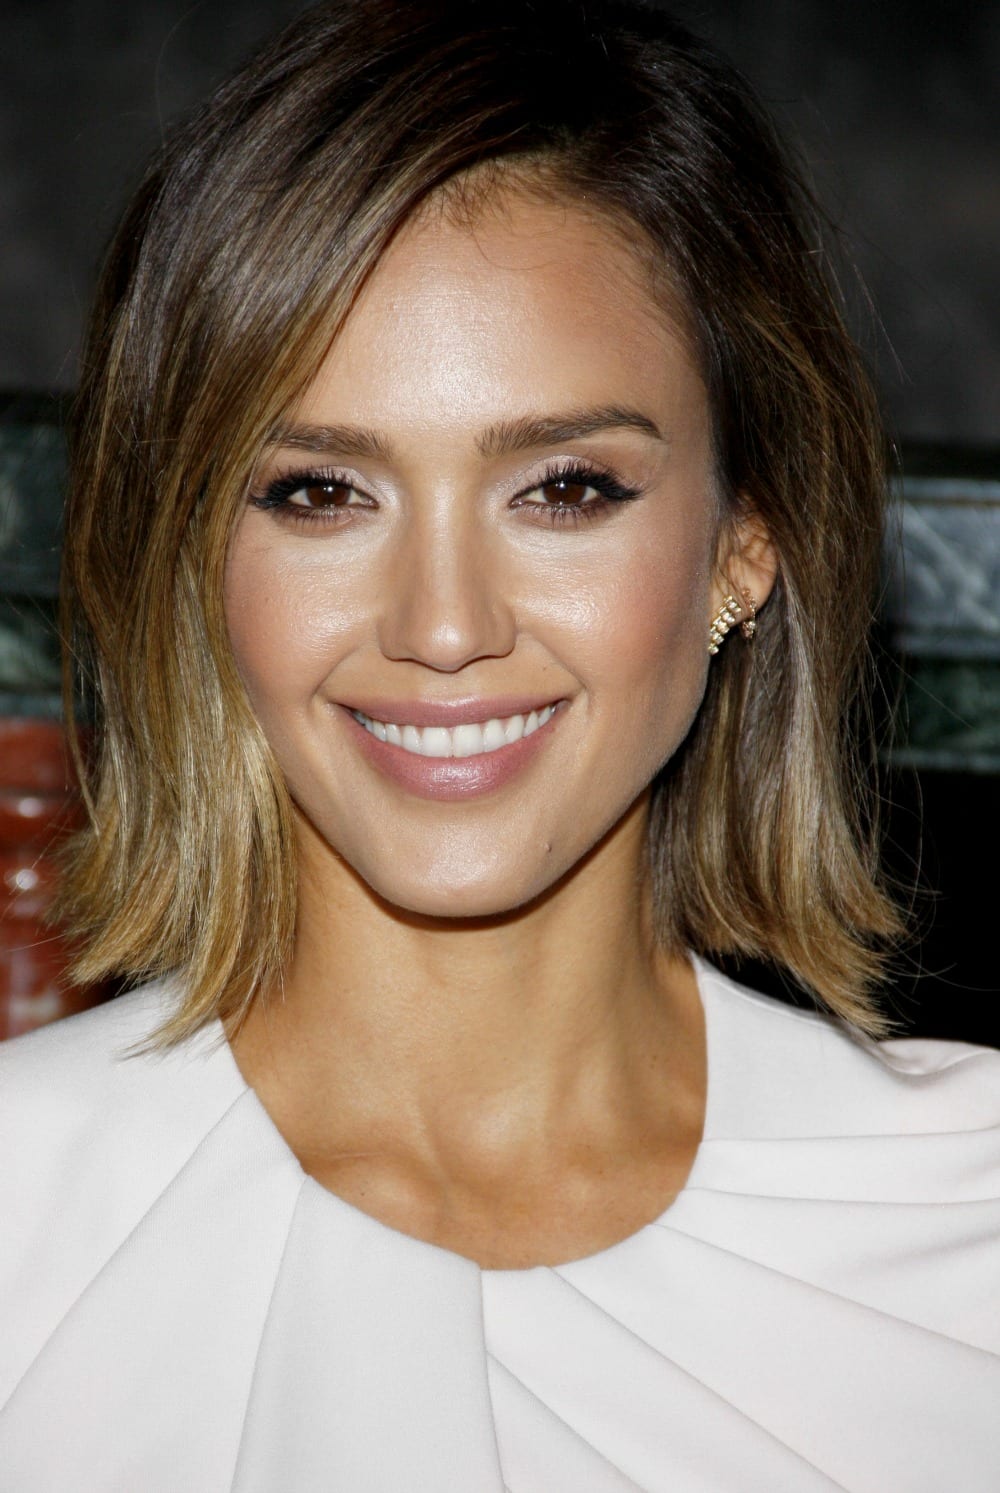 20 Hairstyles for Short Hair You Will Want to Show Your ...